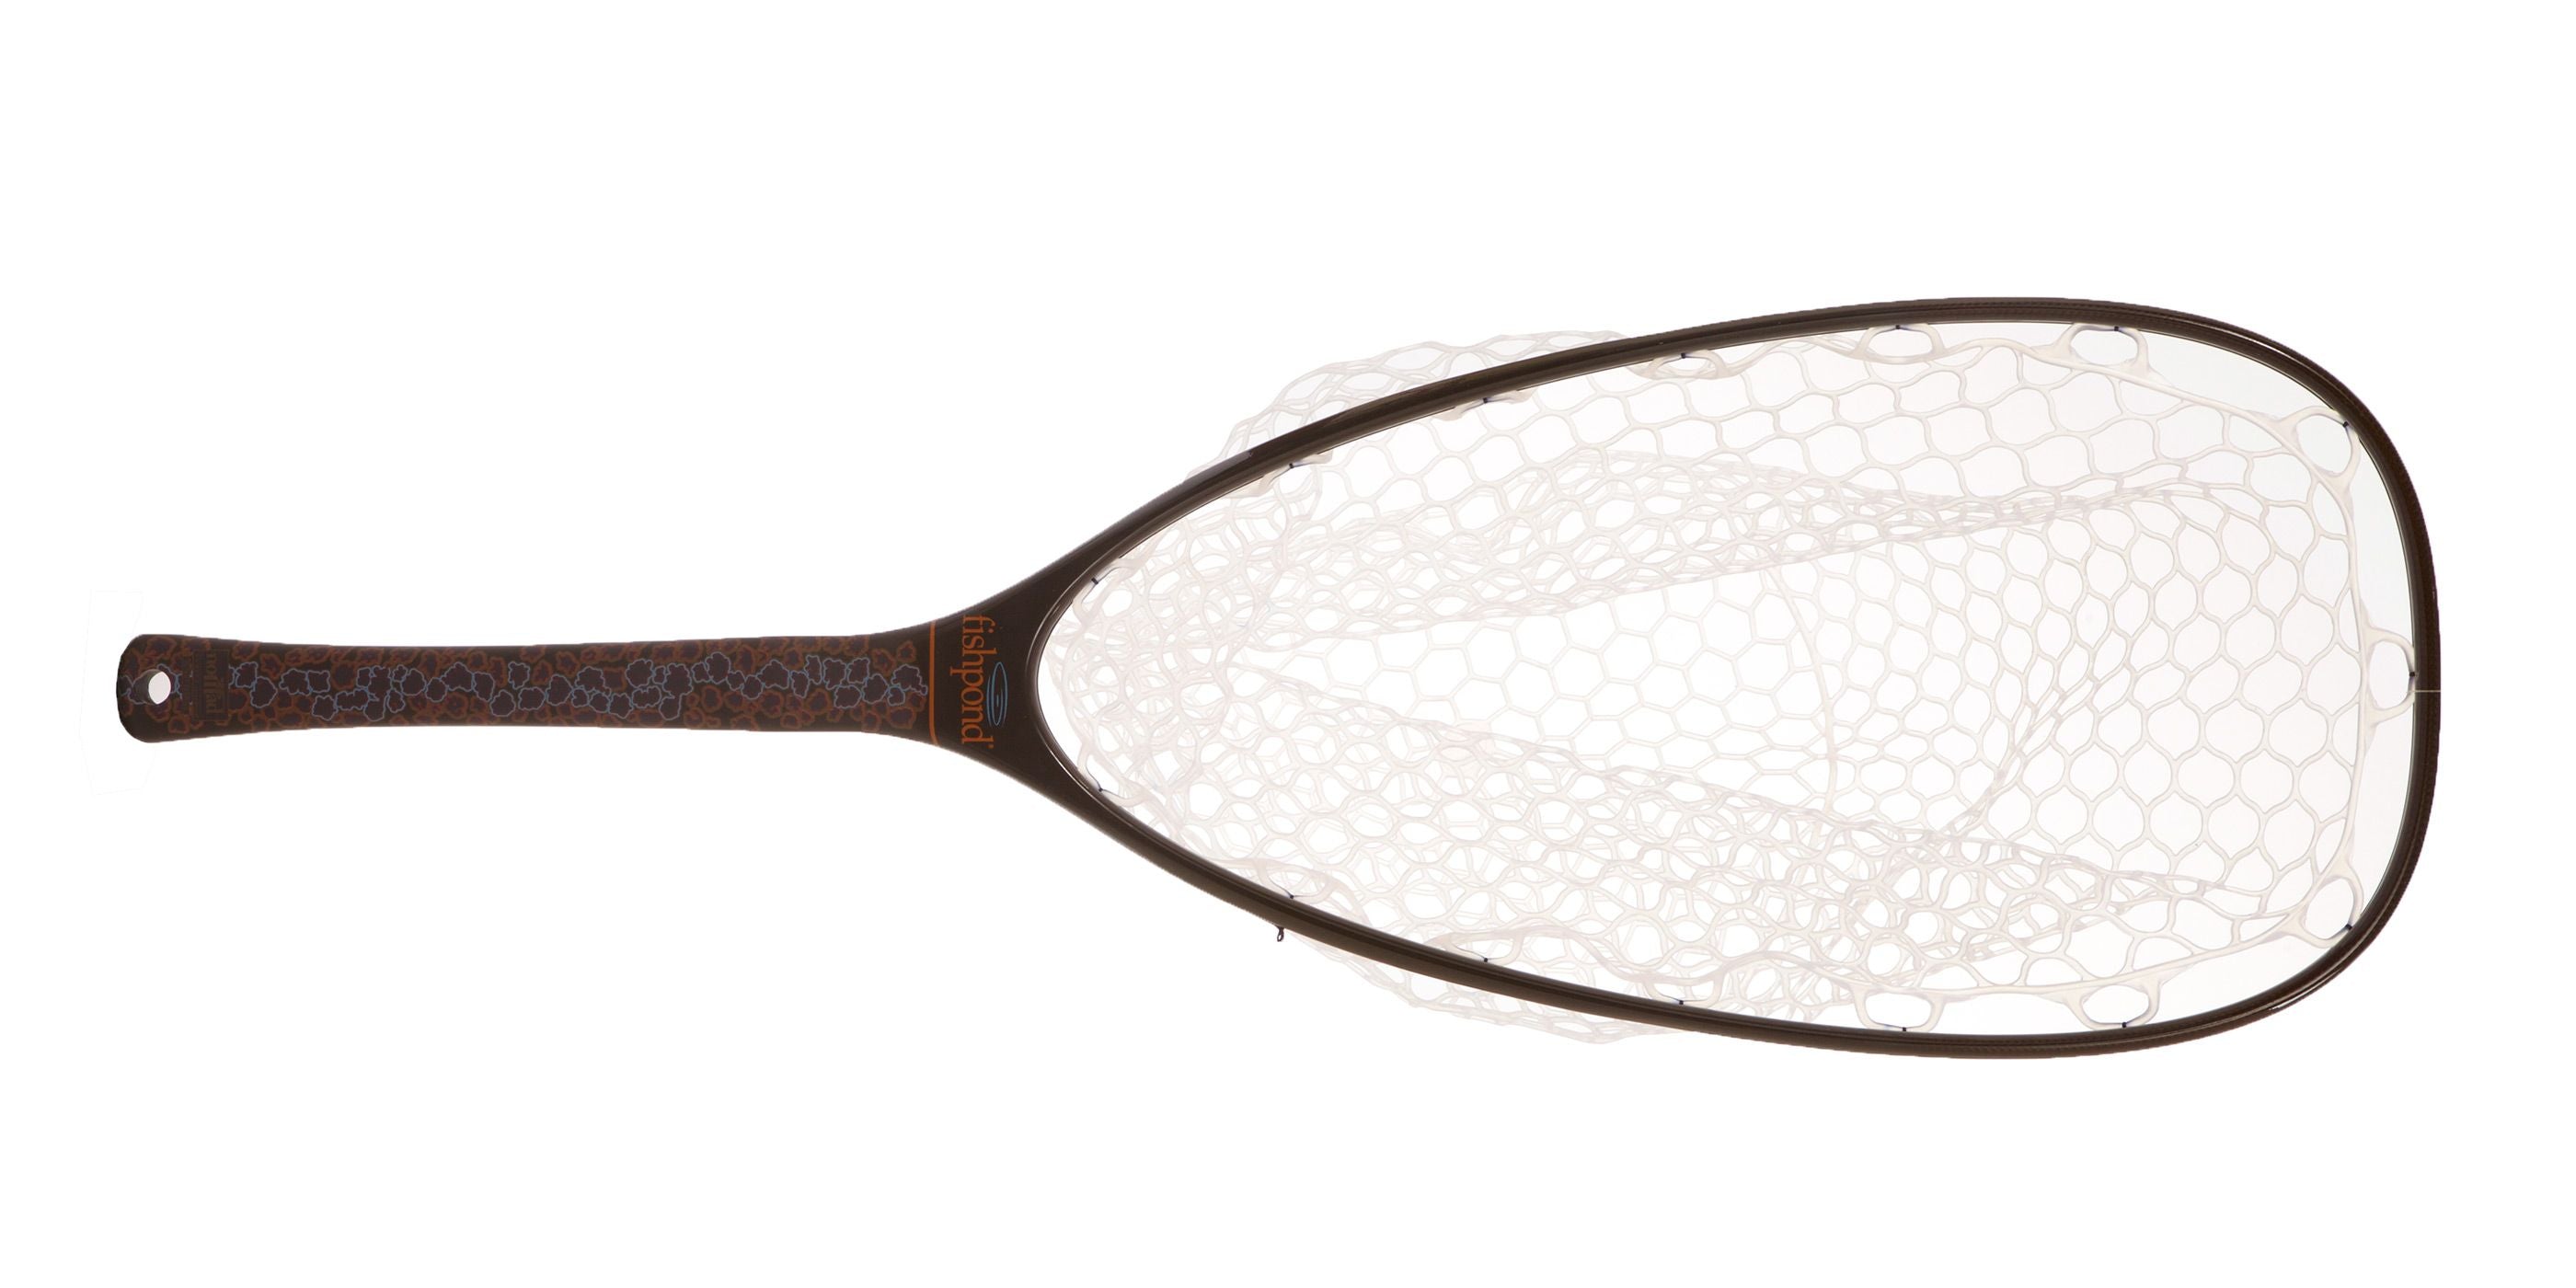 Fishpond Nomad, Emerger Brown Trout Net